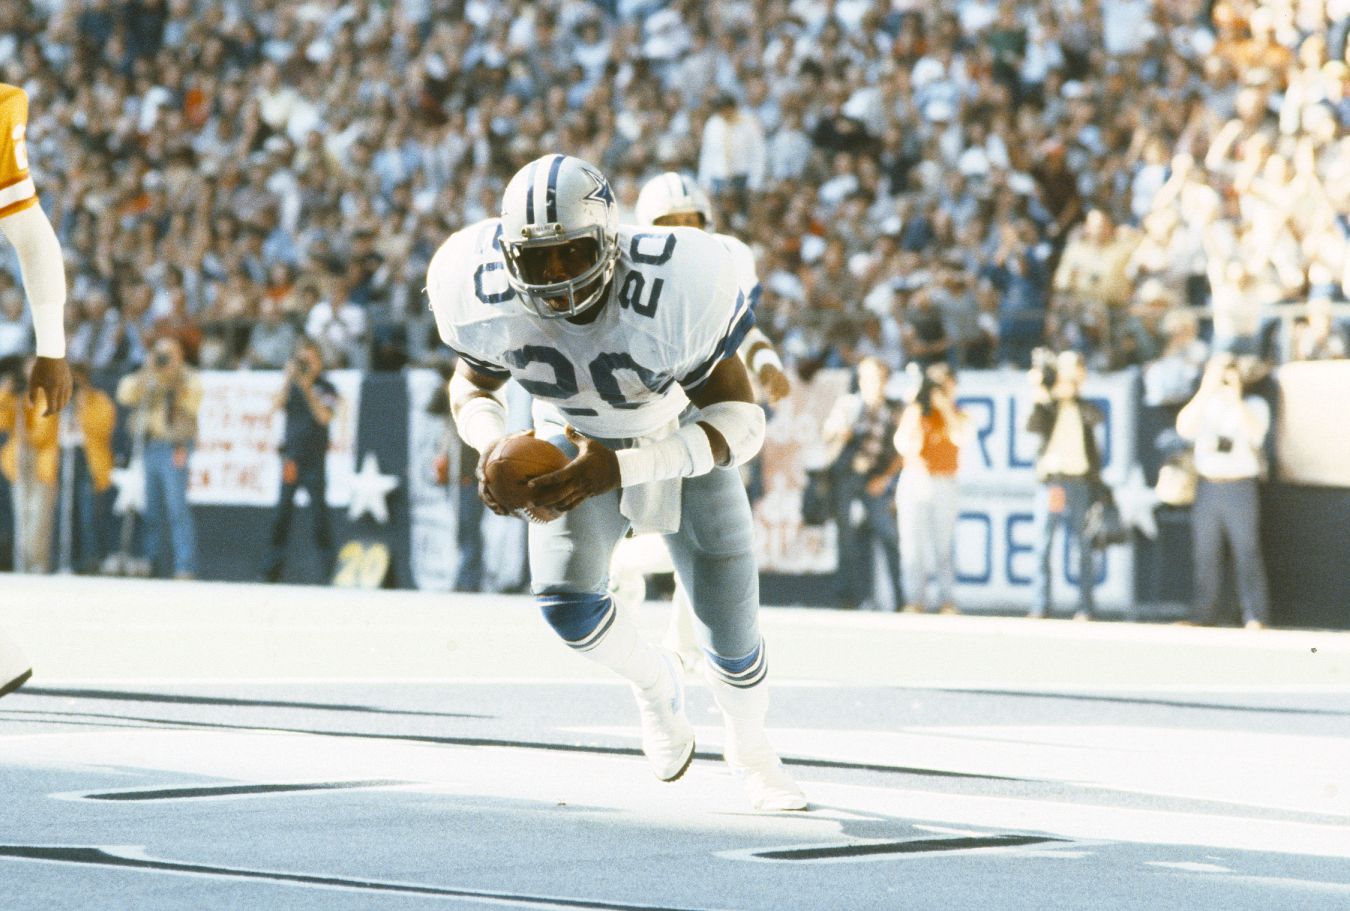 In his career, Ron Springs shared some of the load in the Dallas Cowboys' backfield with Tony Dorsett. He, however, ultimately died too soon.